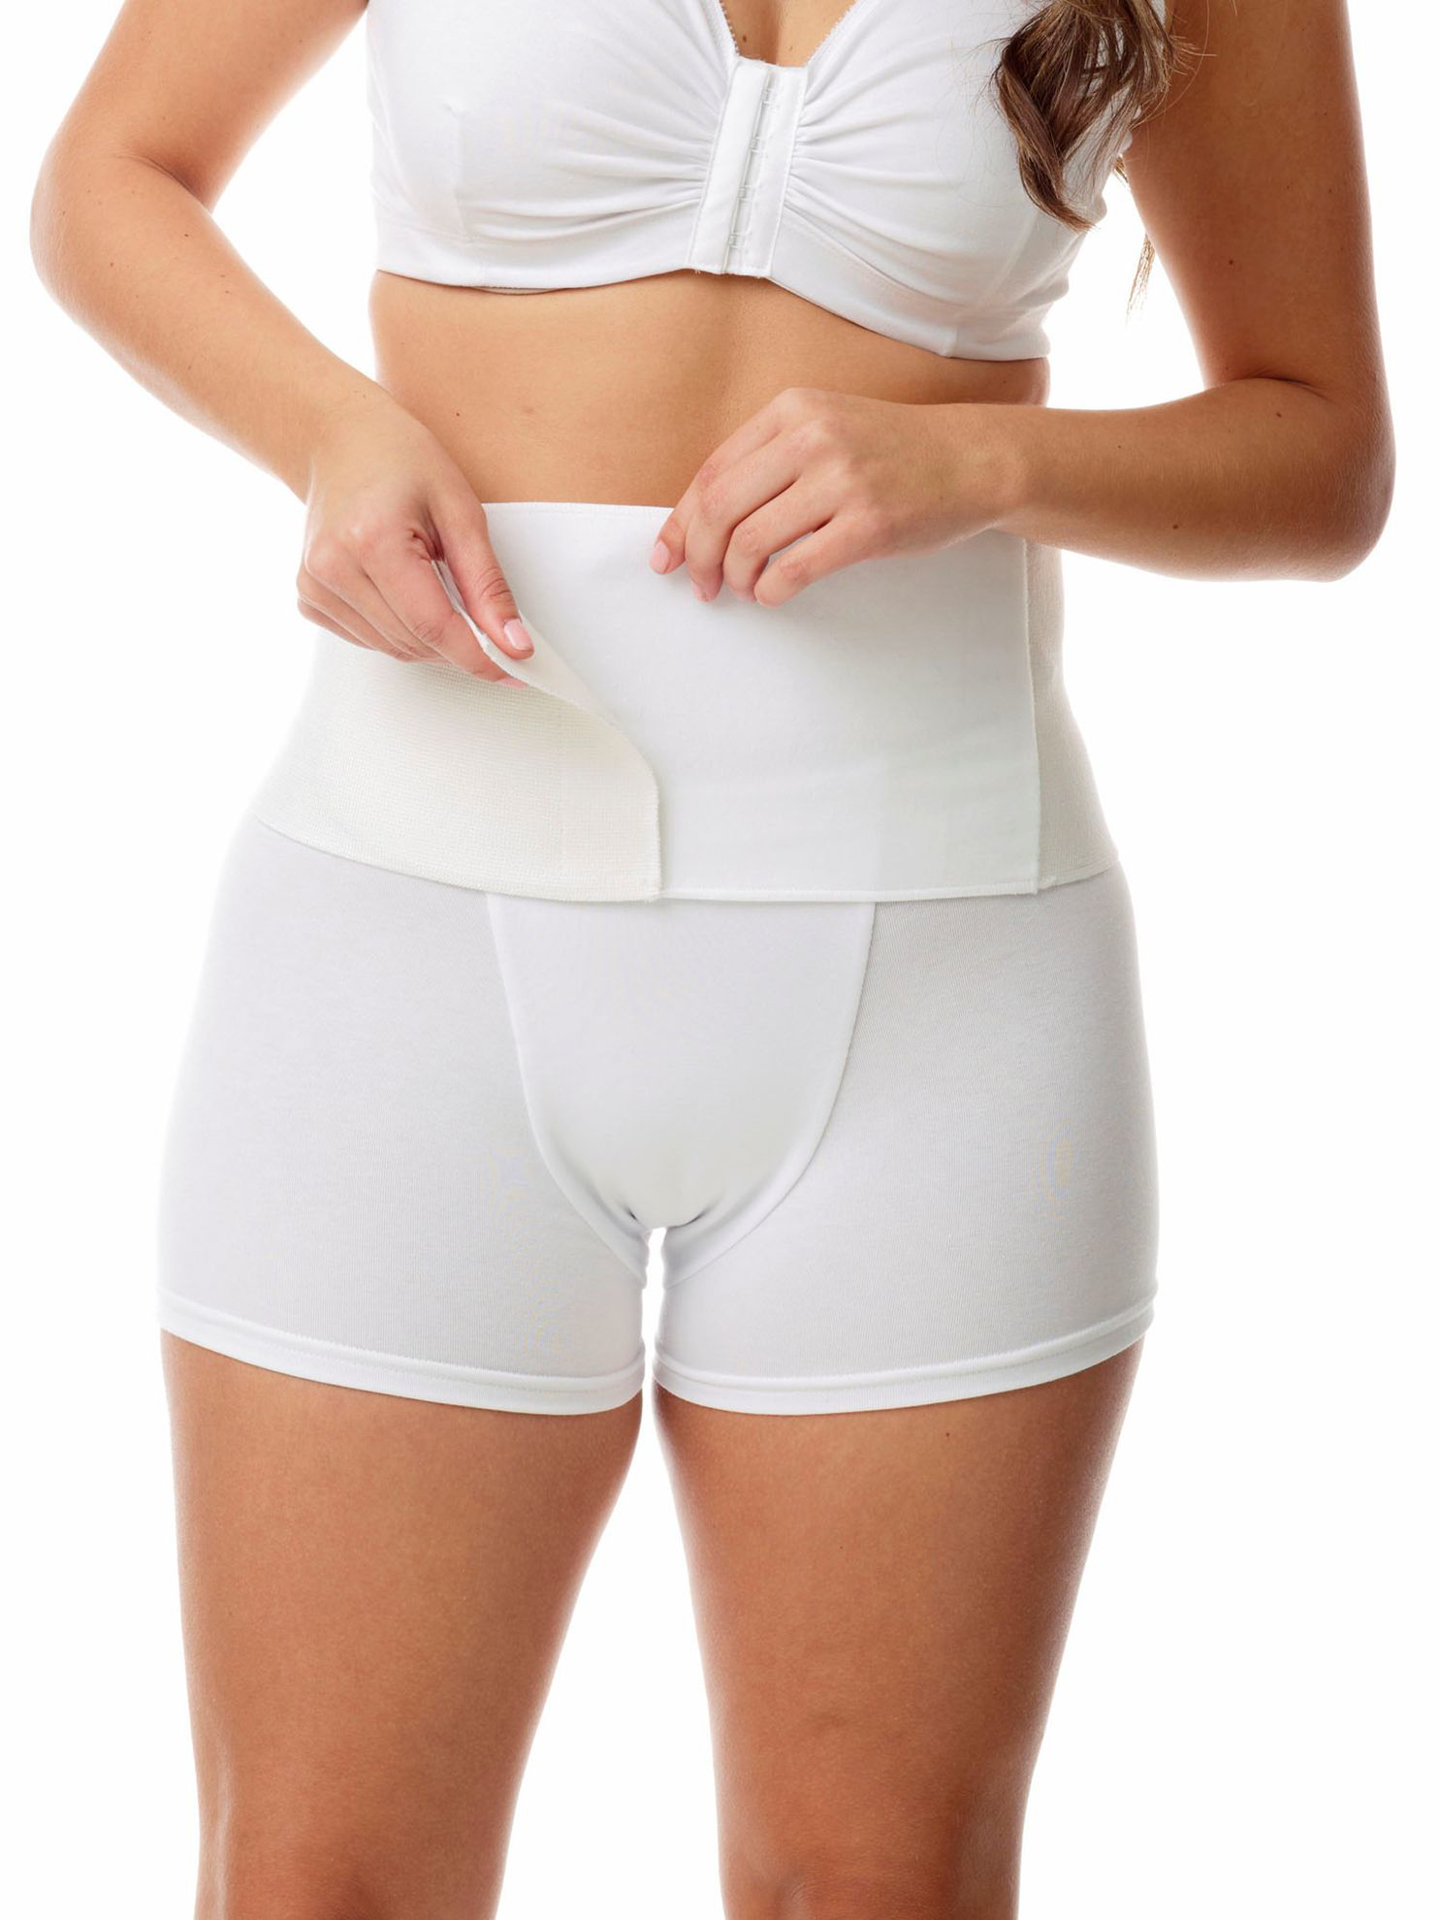 Underworks Post Delivery Abdominal Binder 6-inch with Velcro Closure -  White - S